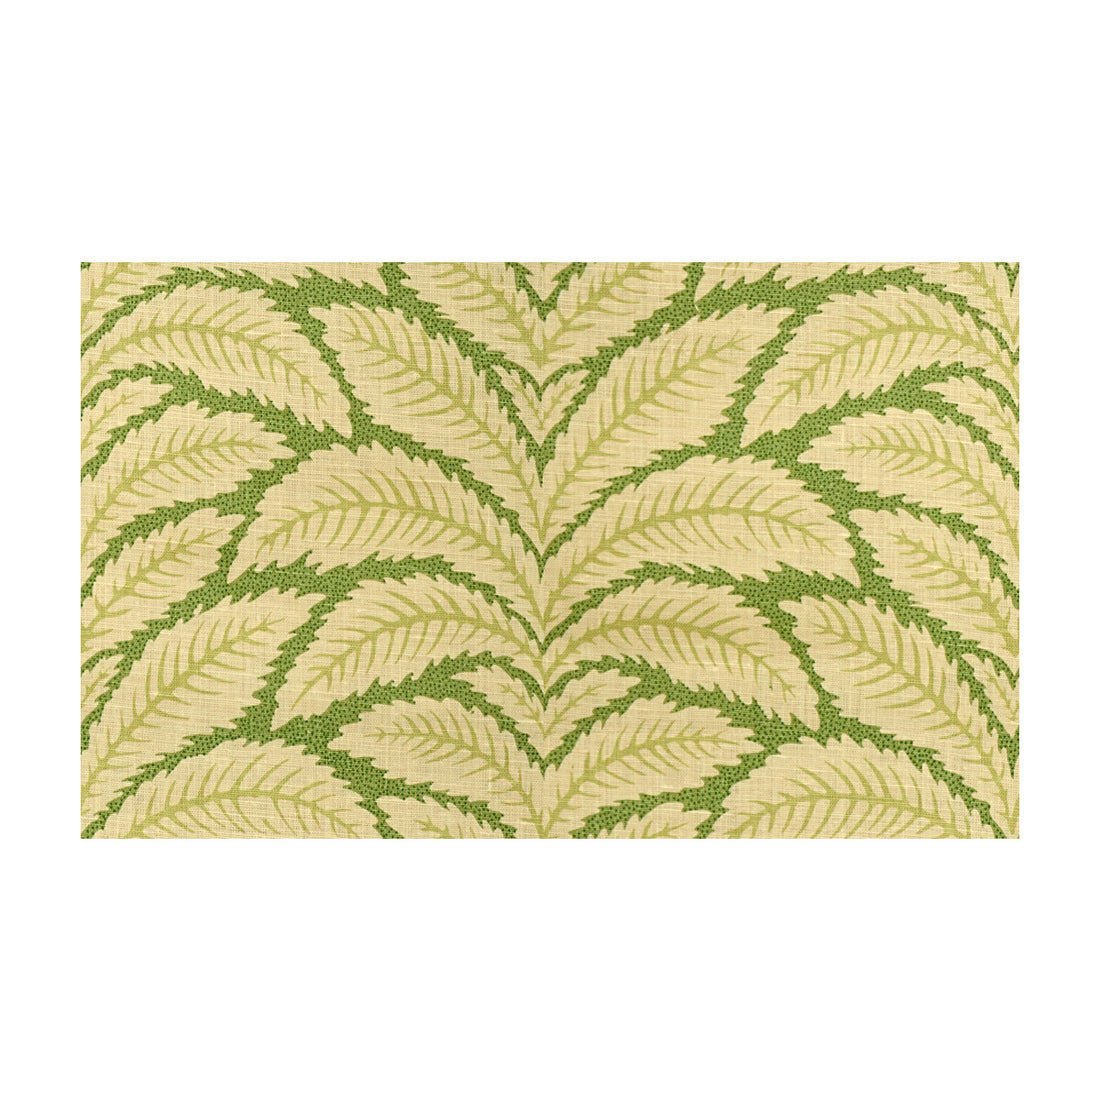 Talavera Linen fabric in leaf color - pattern 8014104.3.0 - by Brunschwig &amp; Fils in the Maisonnette collection